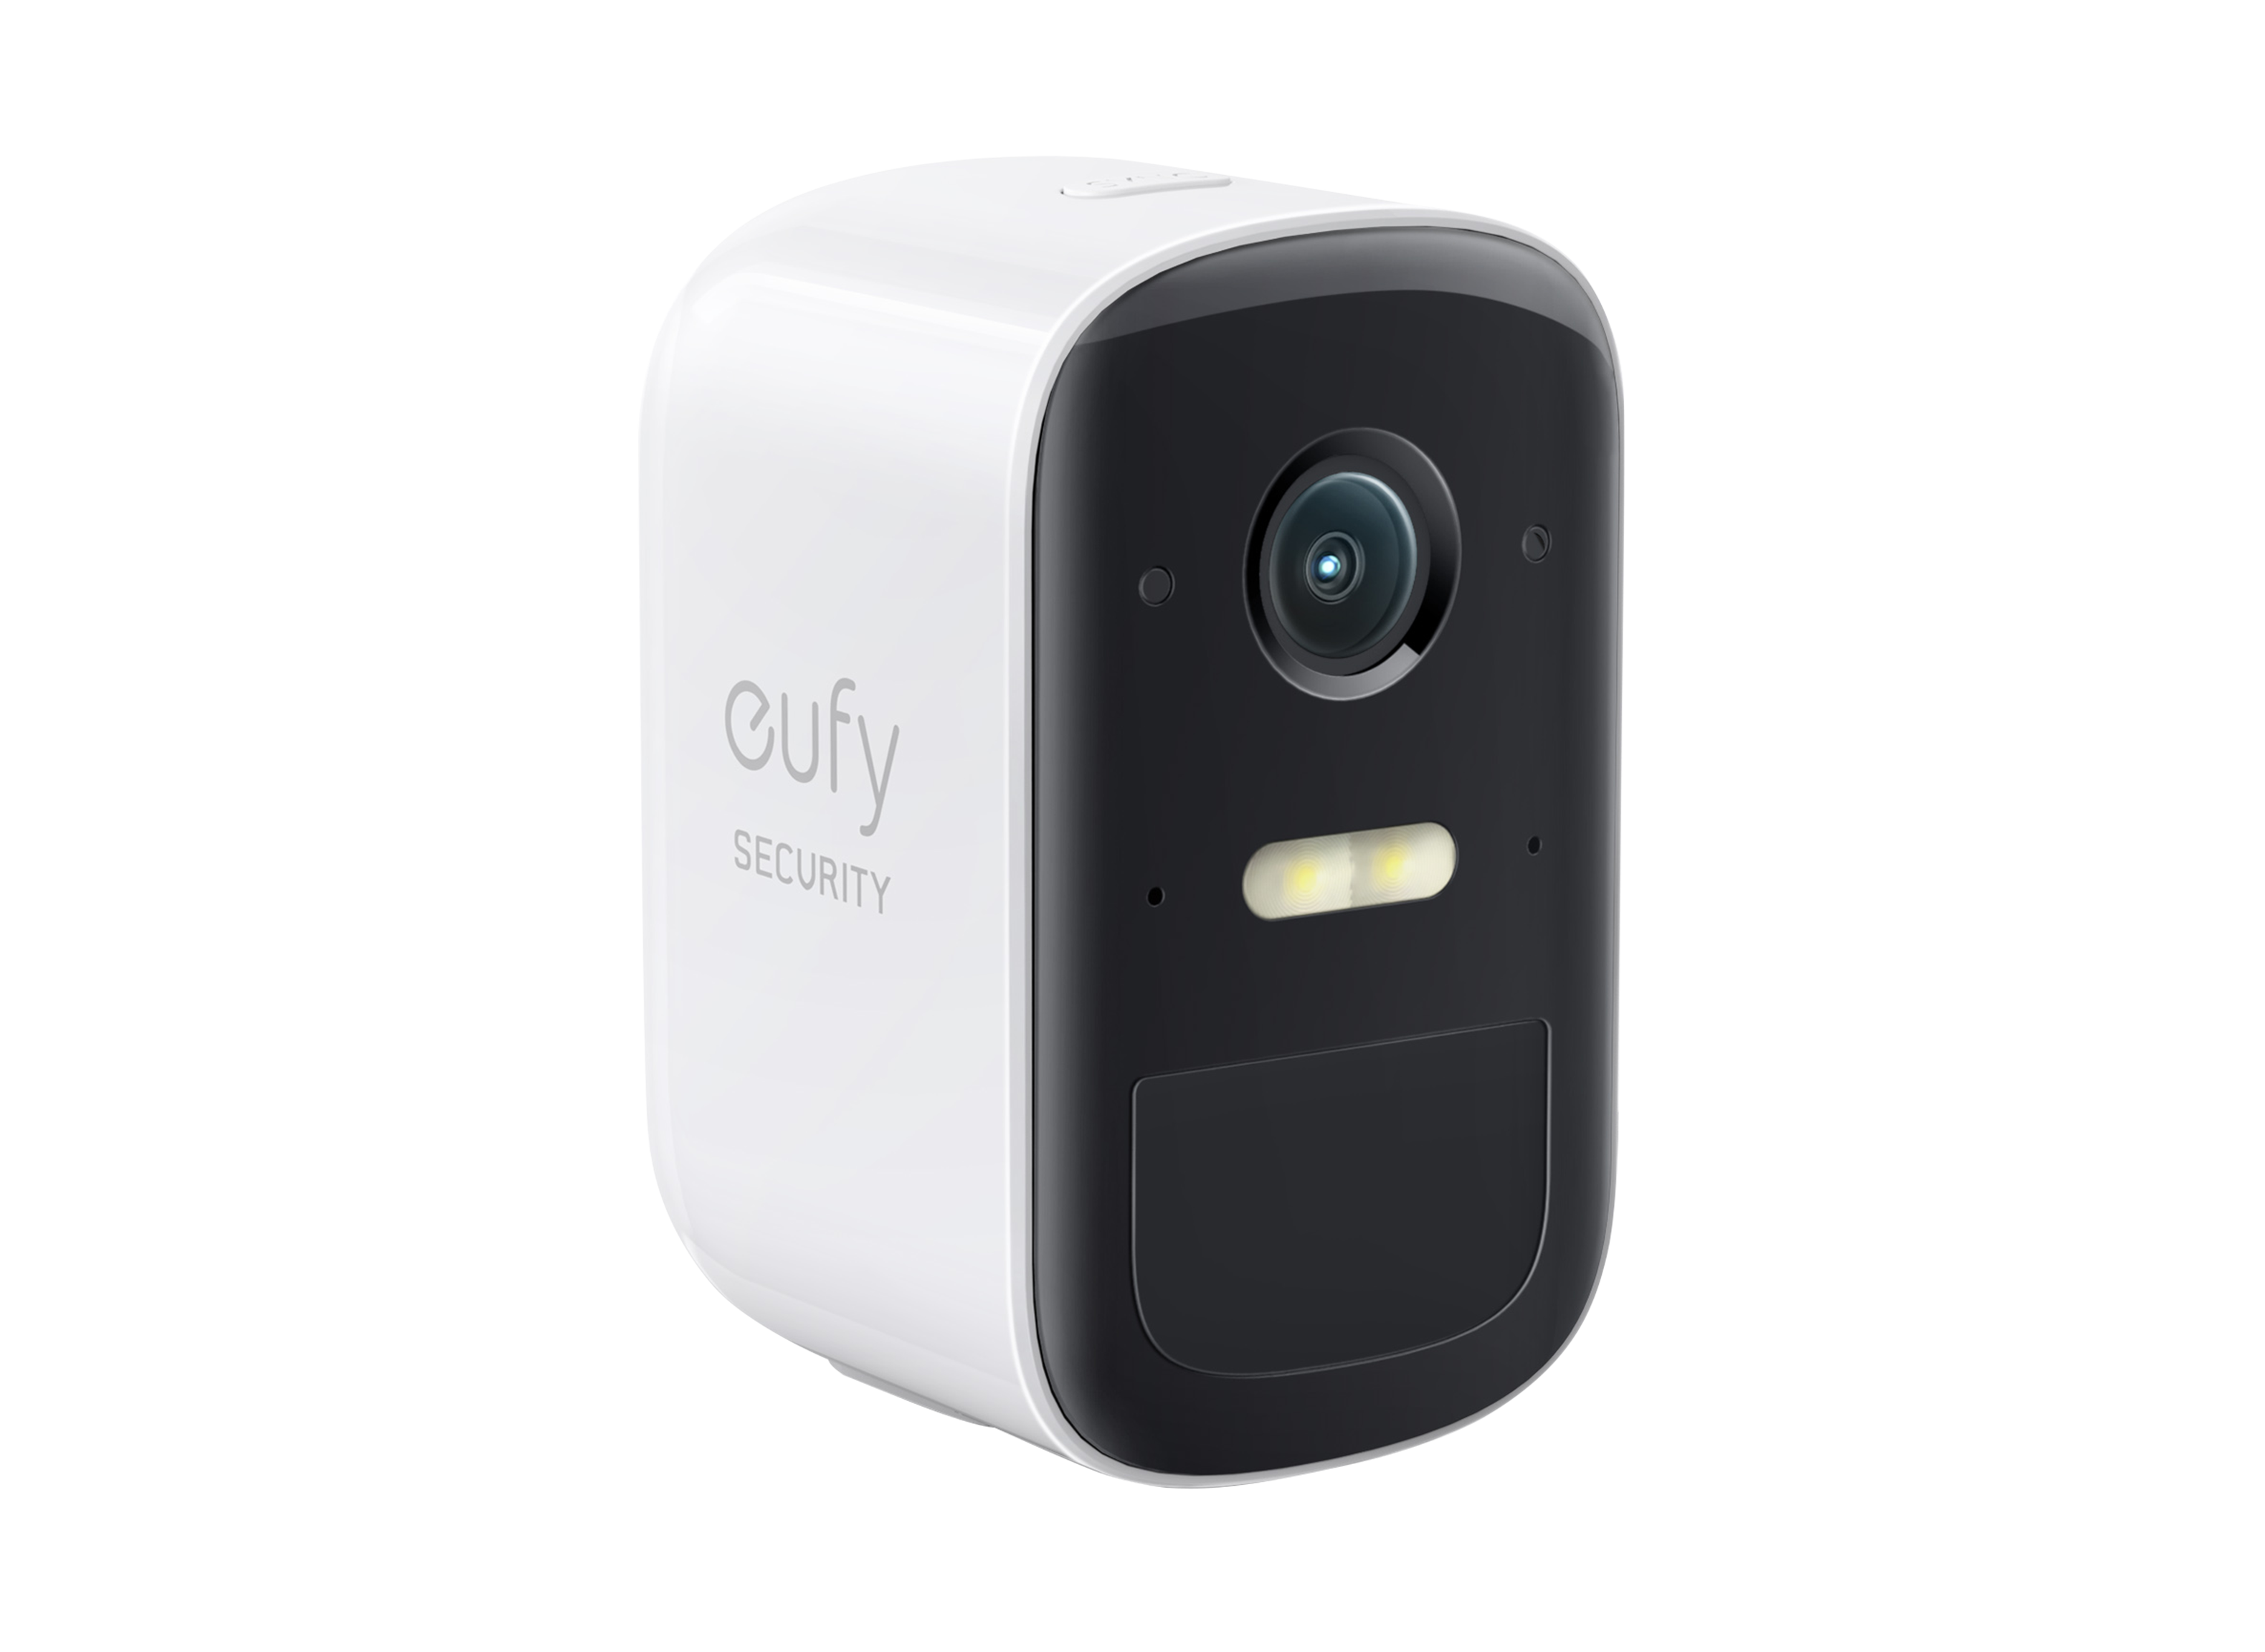 https://crdms.images.consumerreports.org/prod/products/cr/models/406100-wireless-security-cameras-eufy-cam-2c-t8830-1-cam-kit-10028253.png